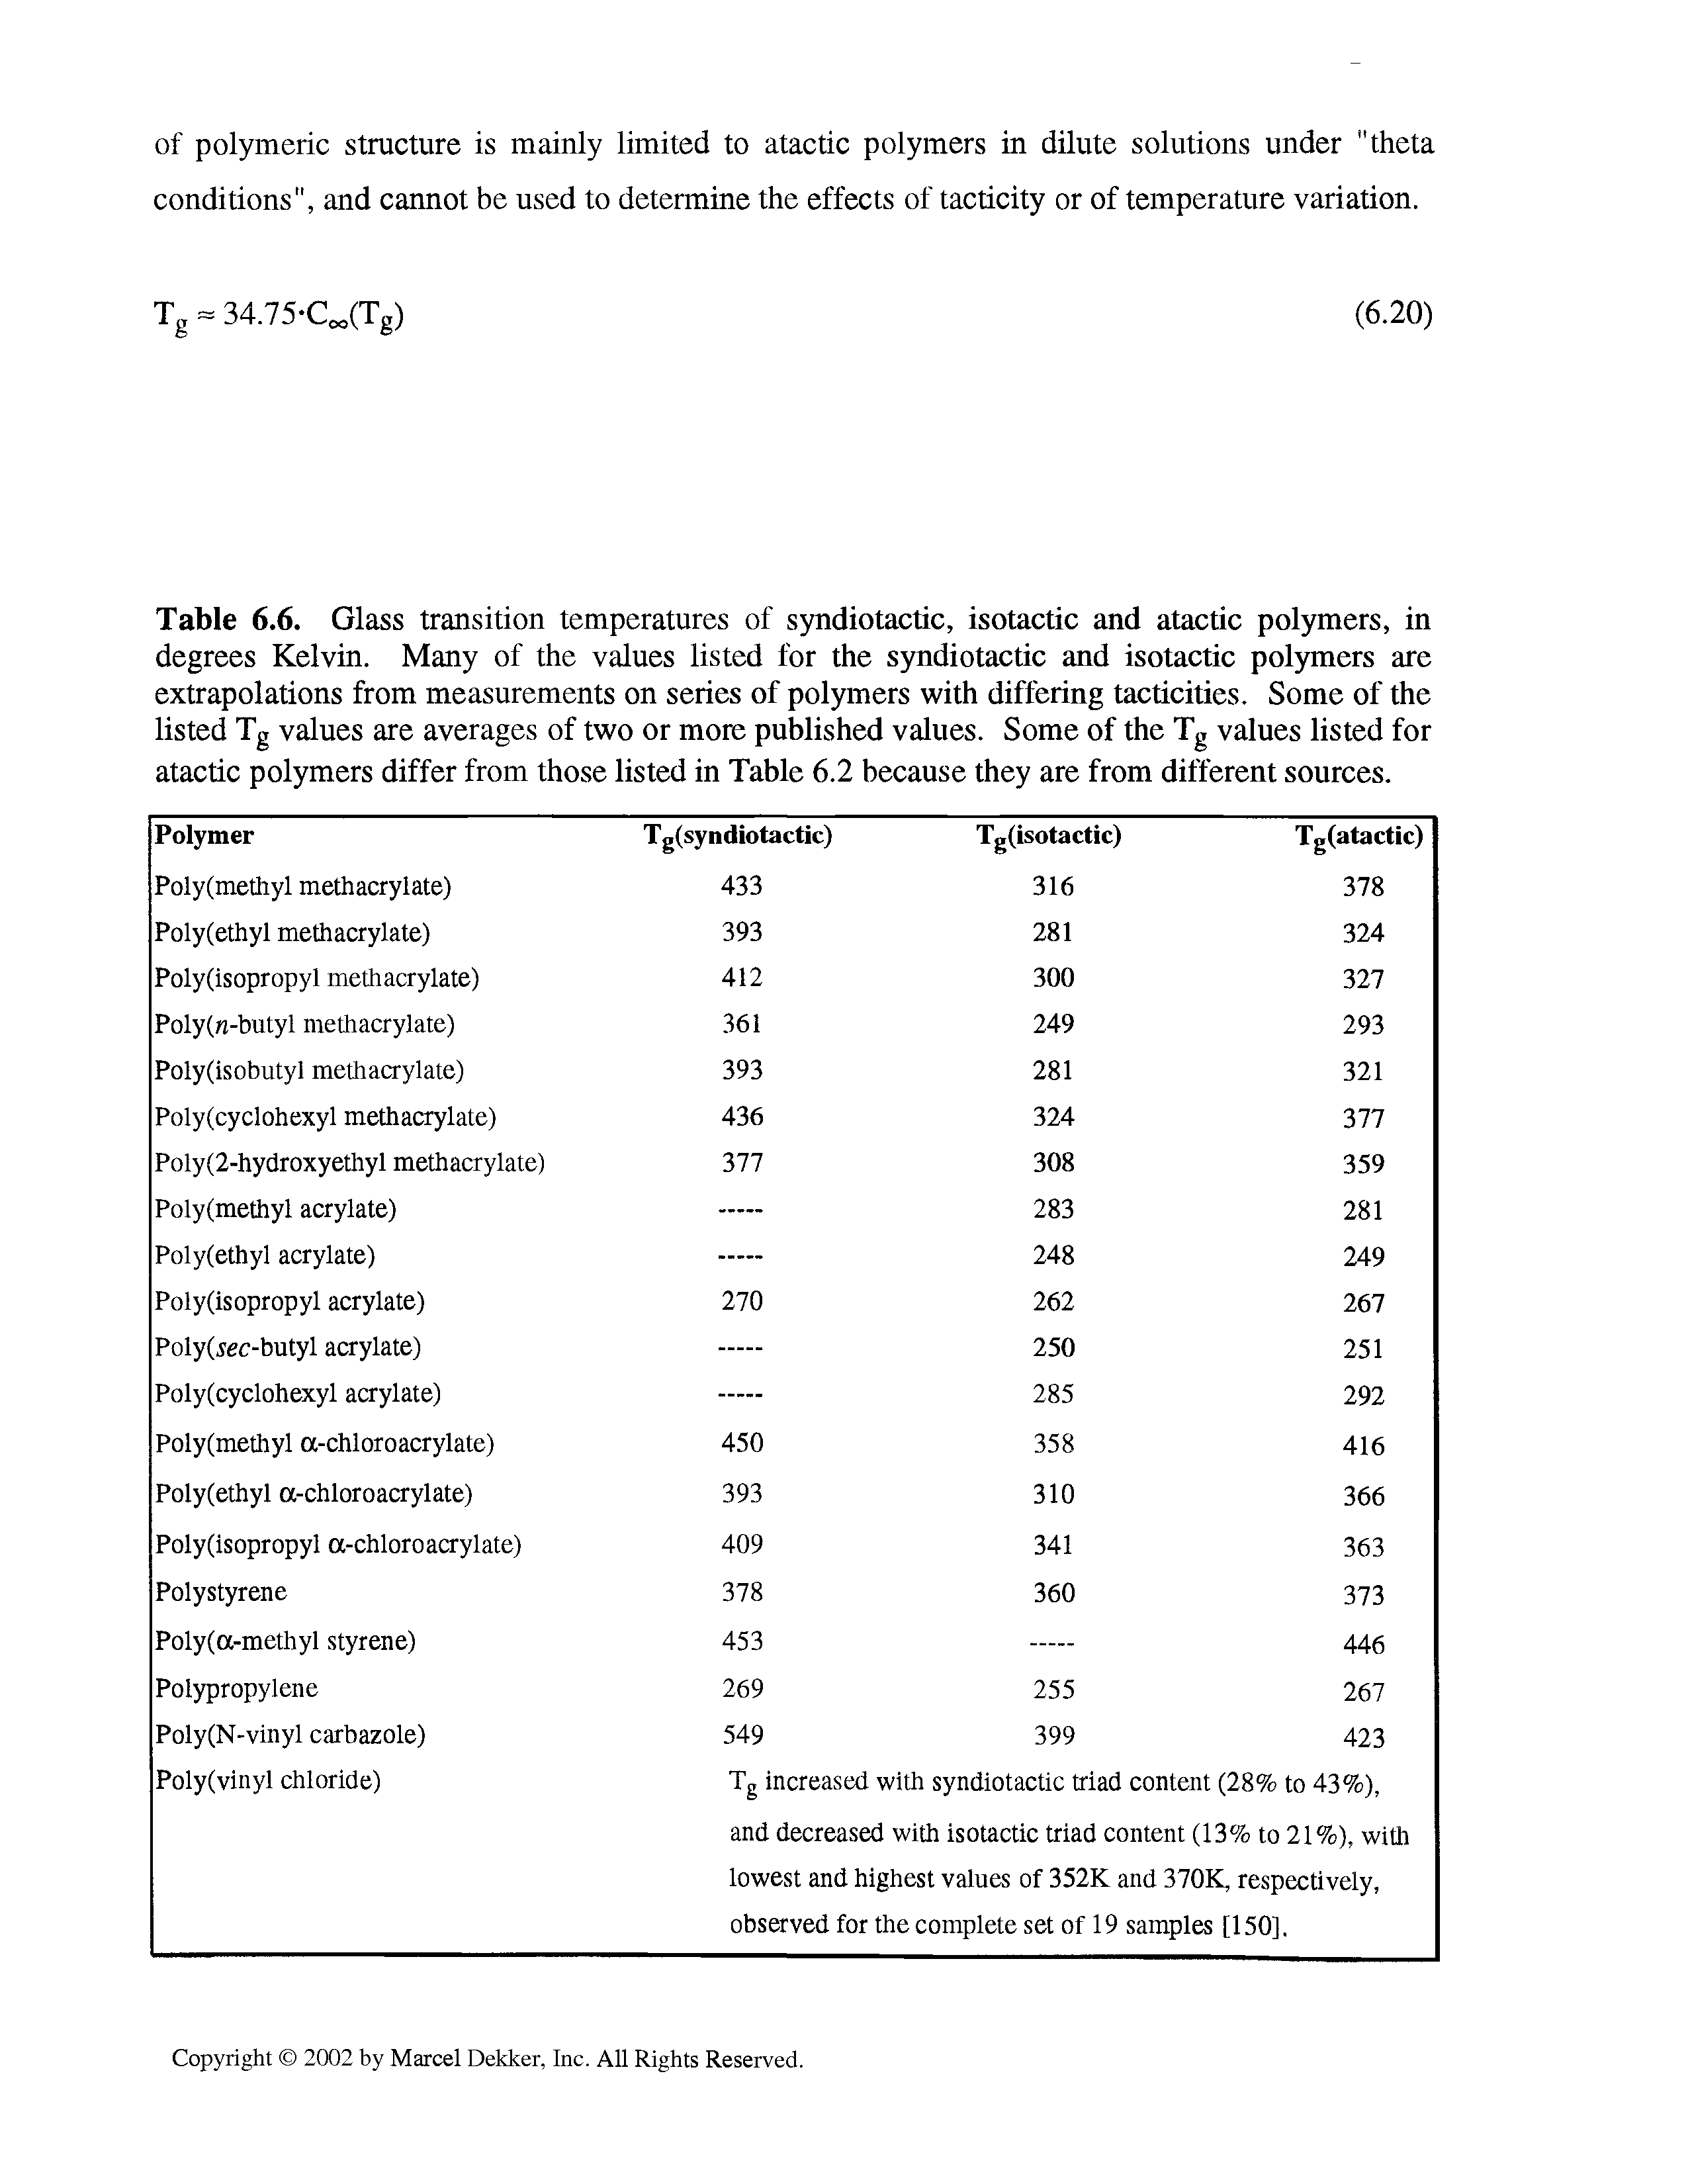 Table 6.6. Glass transition temperatures of syndiotactic, isotactic and atactic polymers, in degrees Kelvin. Many of the values listed for the syndiotactic and isotactic polymers are extrapolations from measurements on series of polymers with differing tacticities. Some of the listed Tg values are averages of two or more published values. Some of the Tg values listed for atactic polymers differ from those listed in Table 6.2 because they are from different sources.